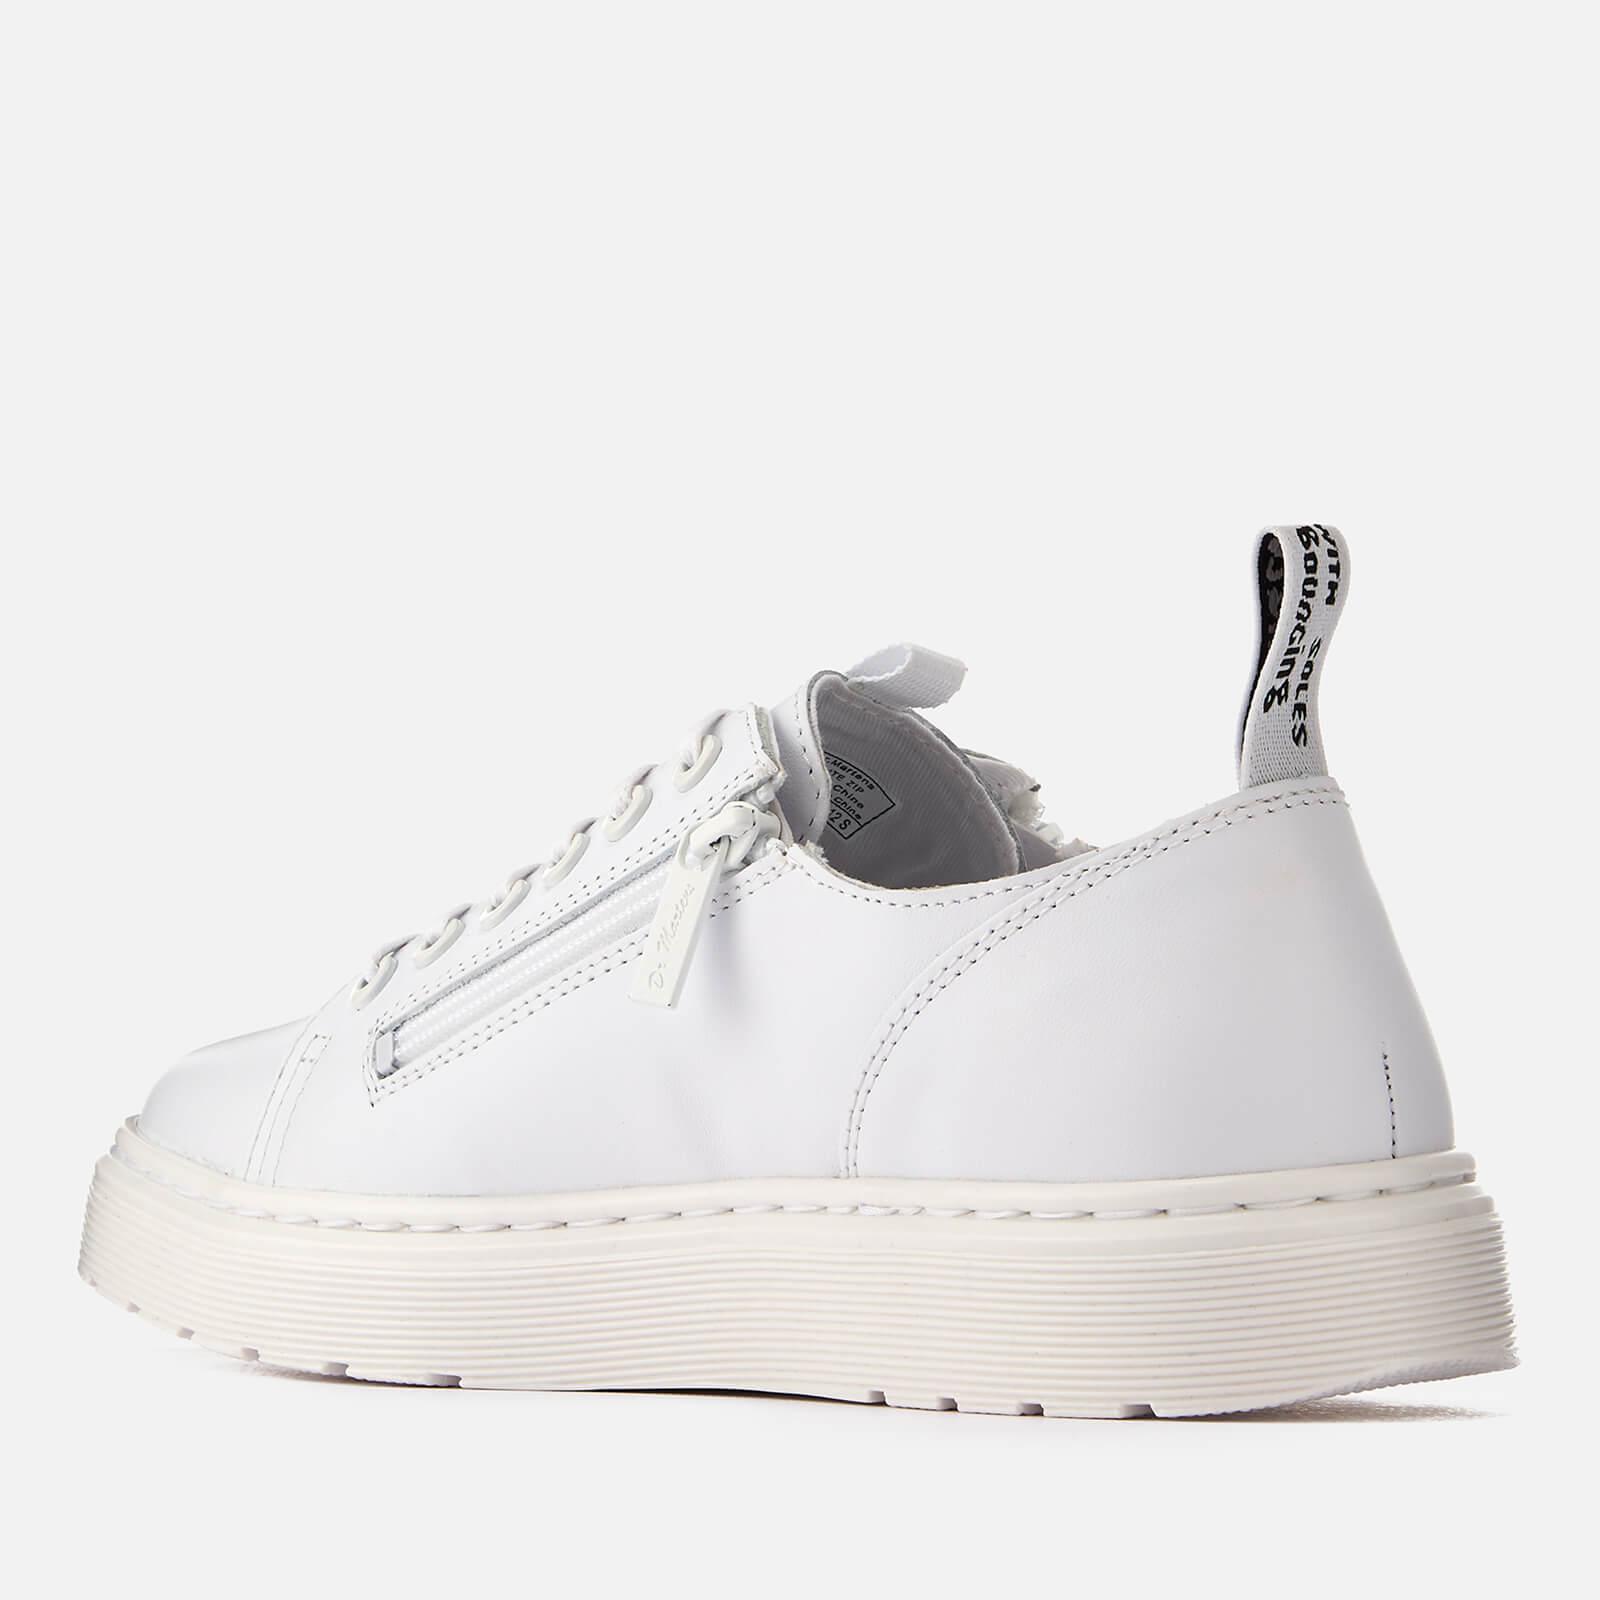 Dr. Martens Dante Zip Softy T Leather 6-eye Shoes in White for Men - Lyst